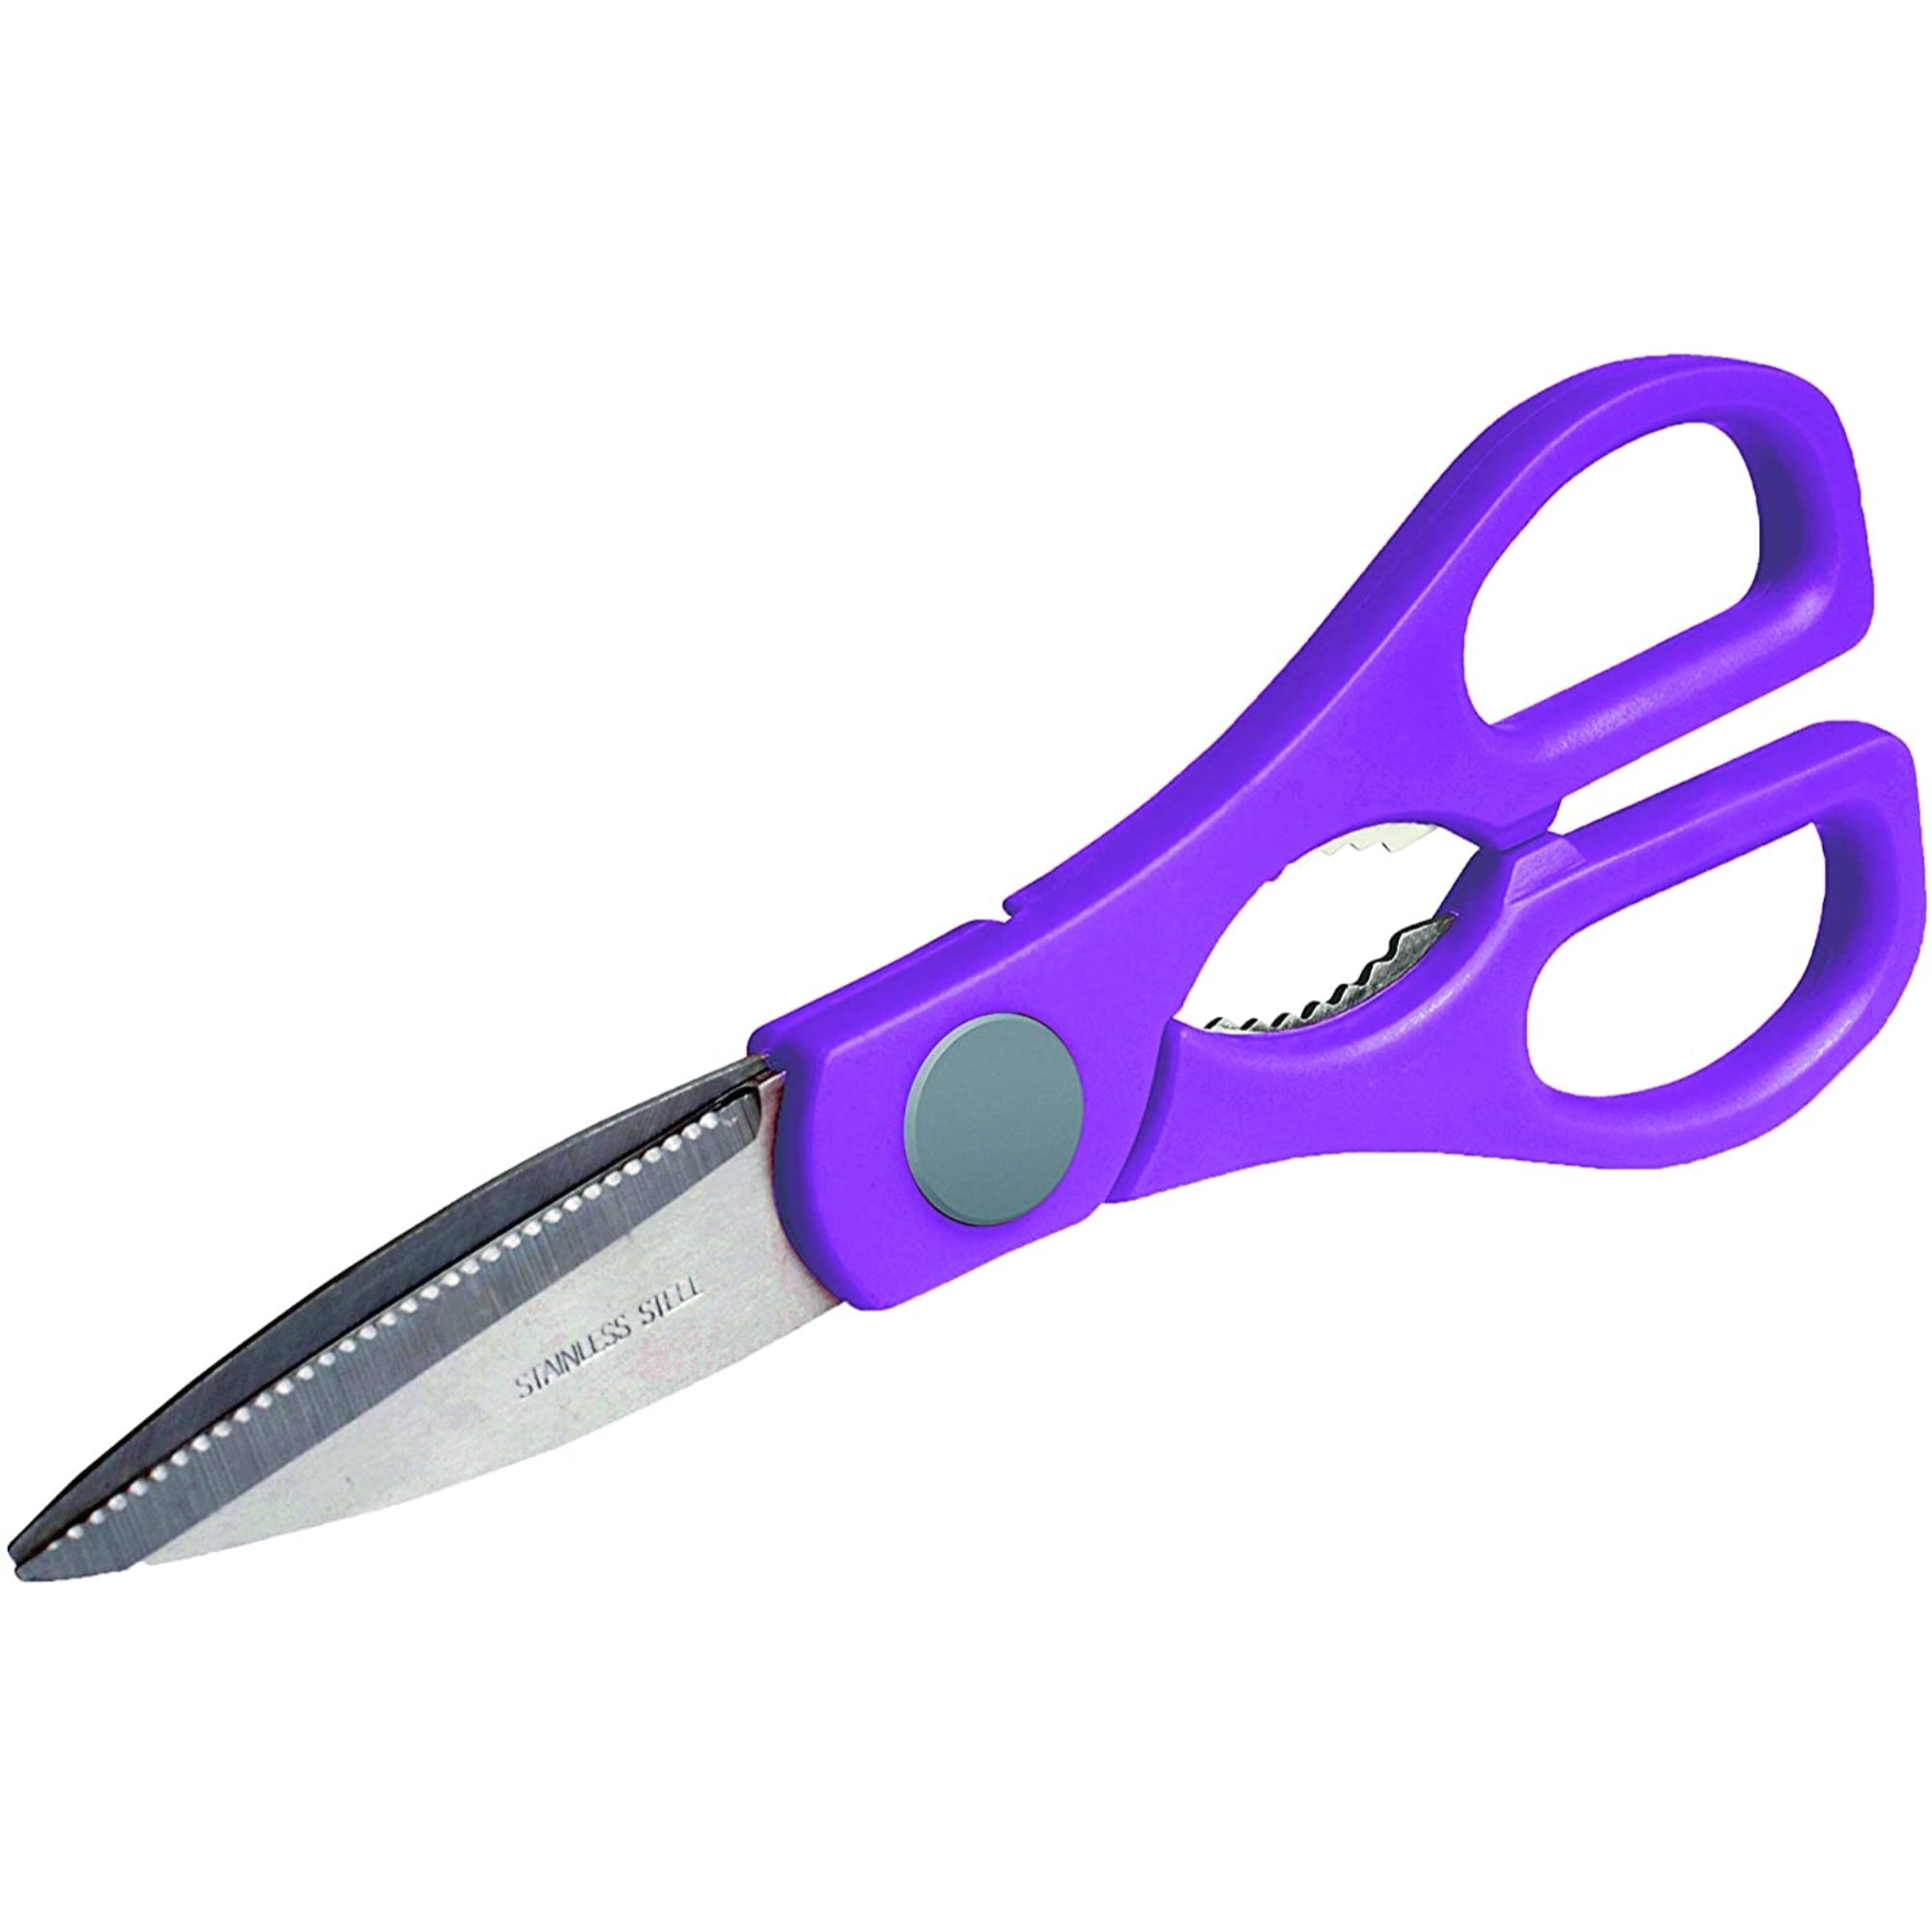 Bloom Household Stainless Steel Blades Shears (Six Count, Assorted Colors)